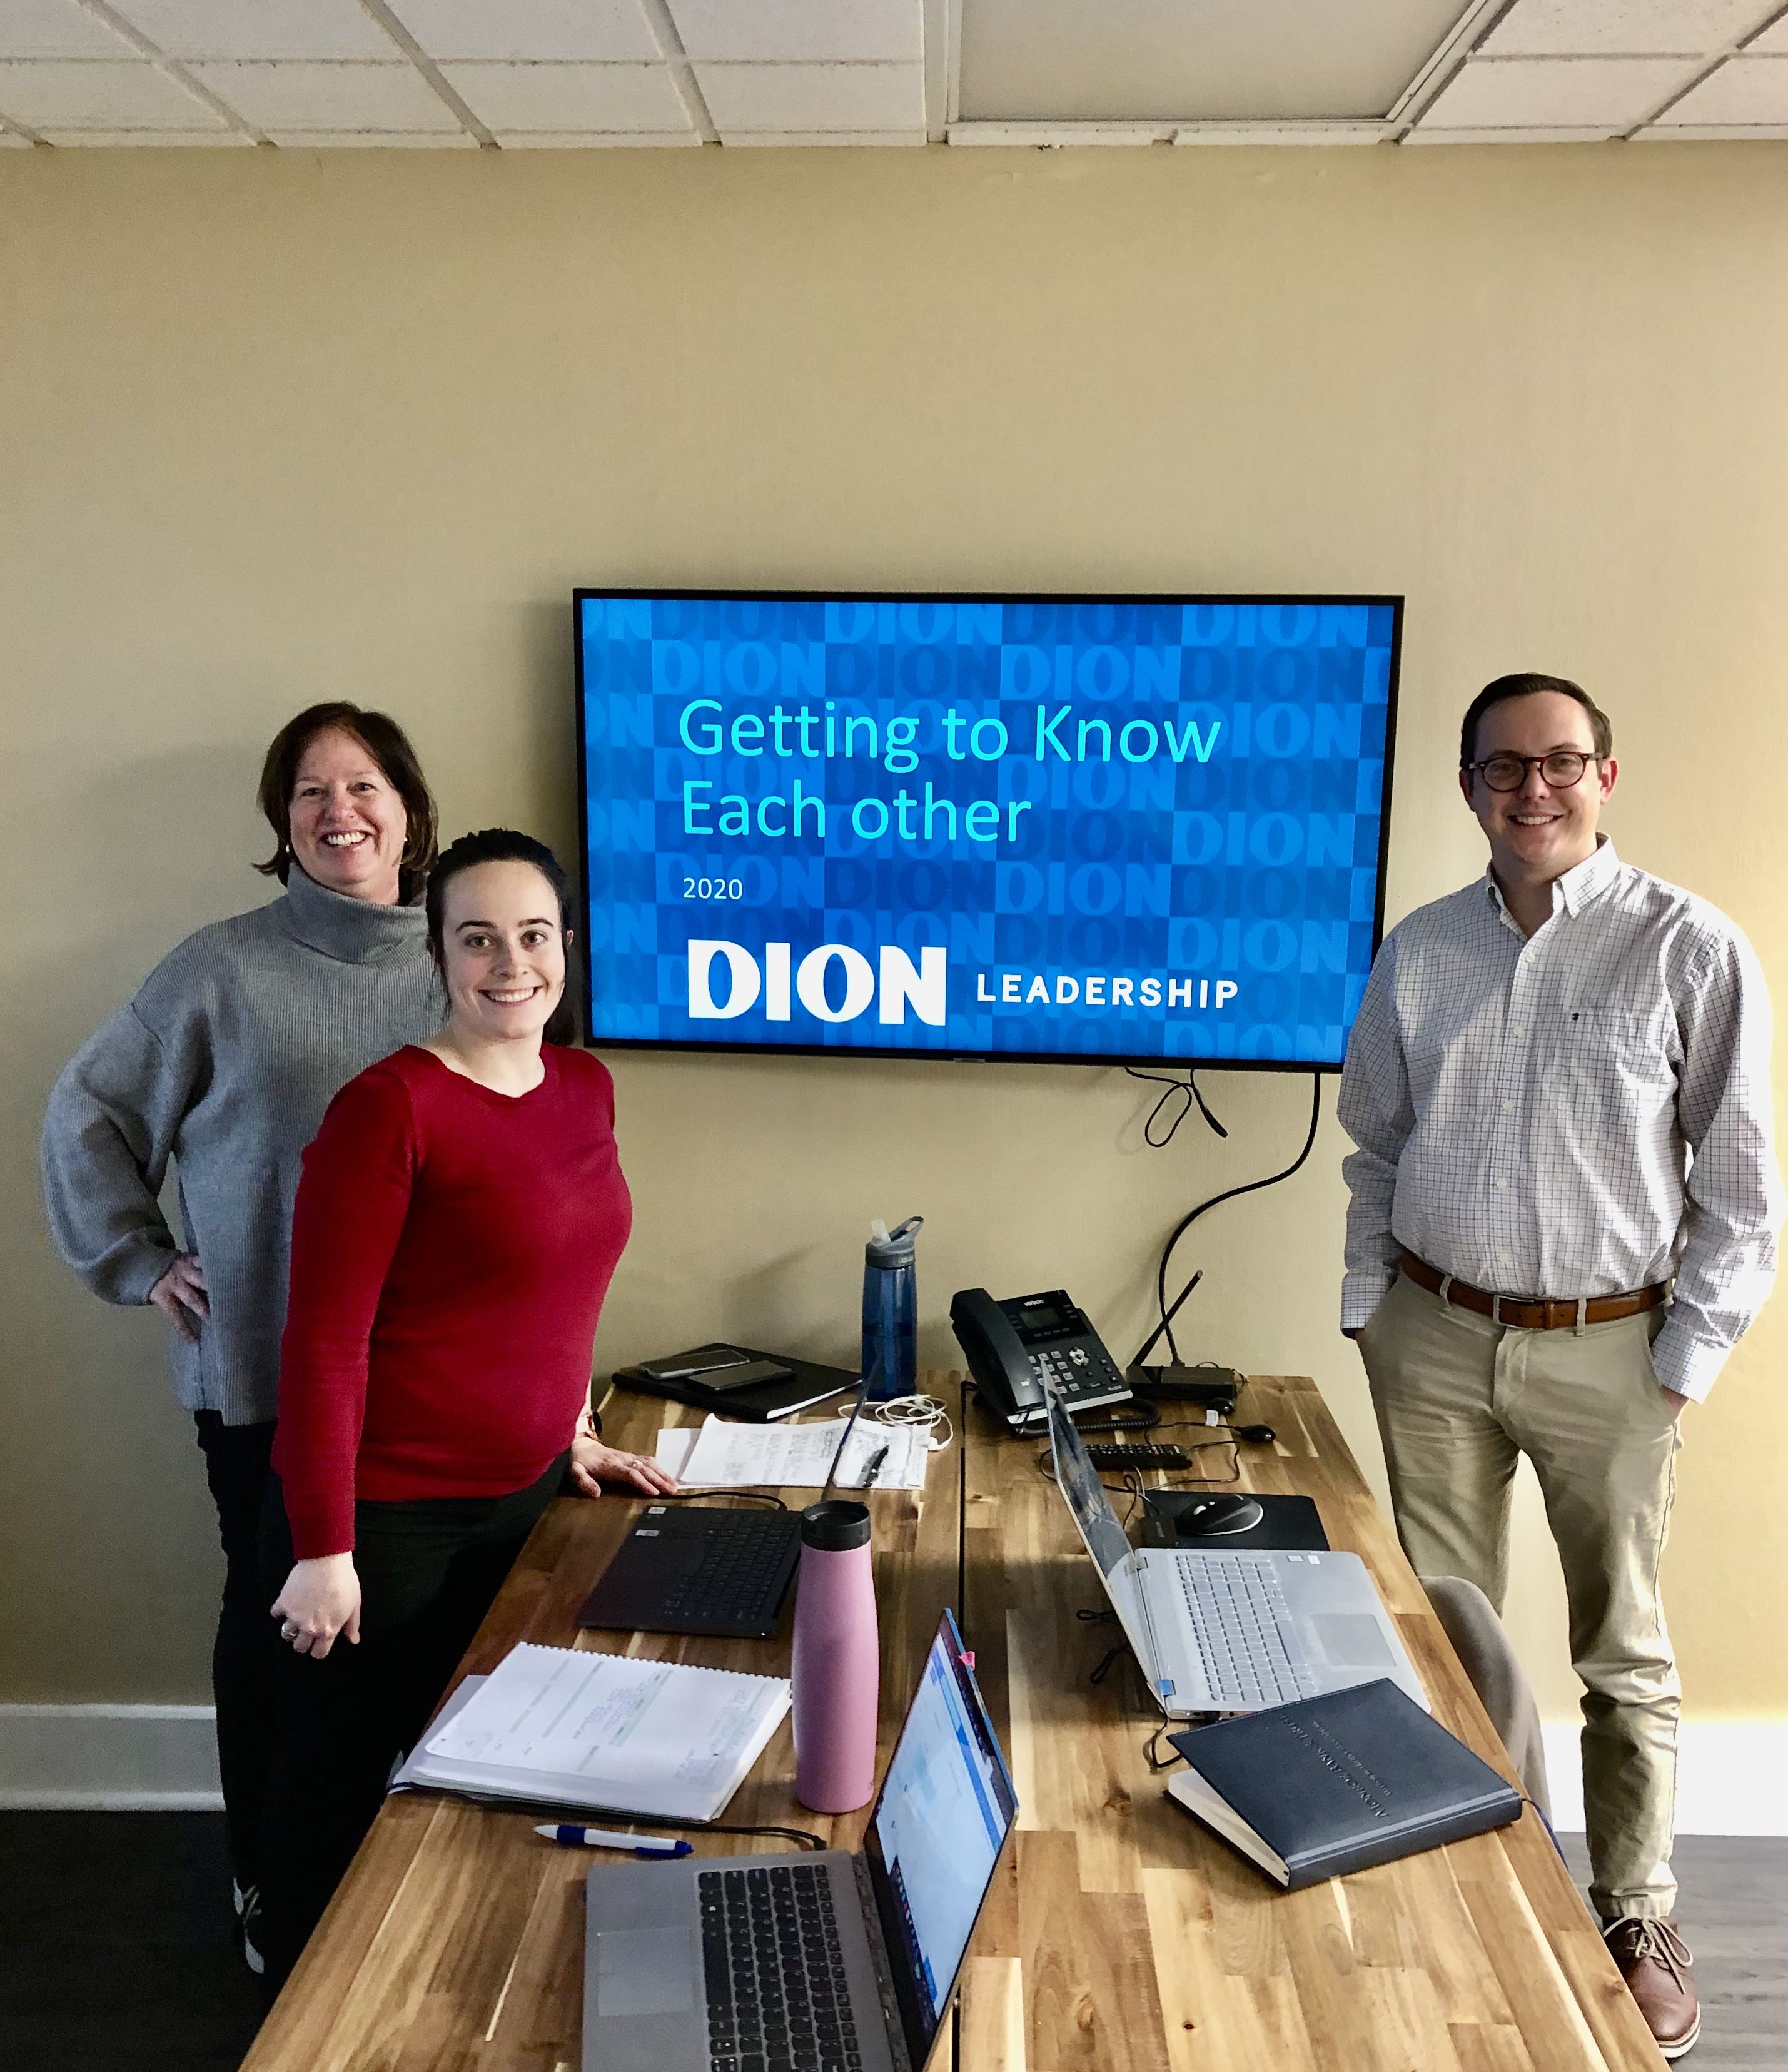 The Dion Leadership Client Delivery Team